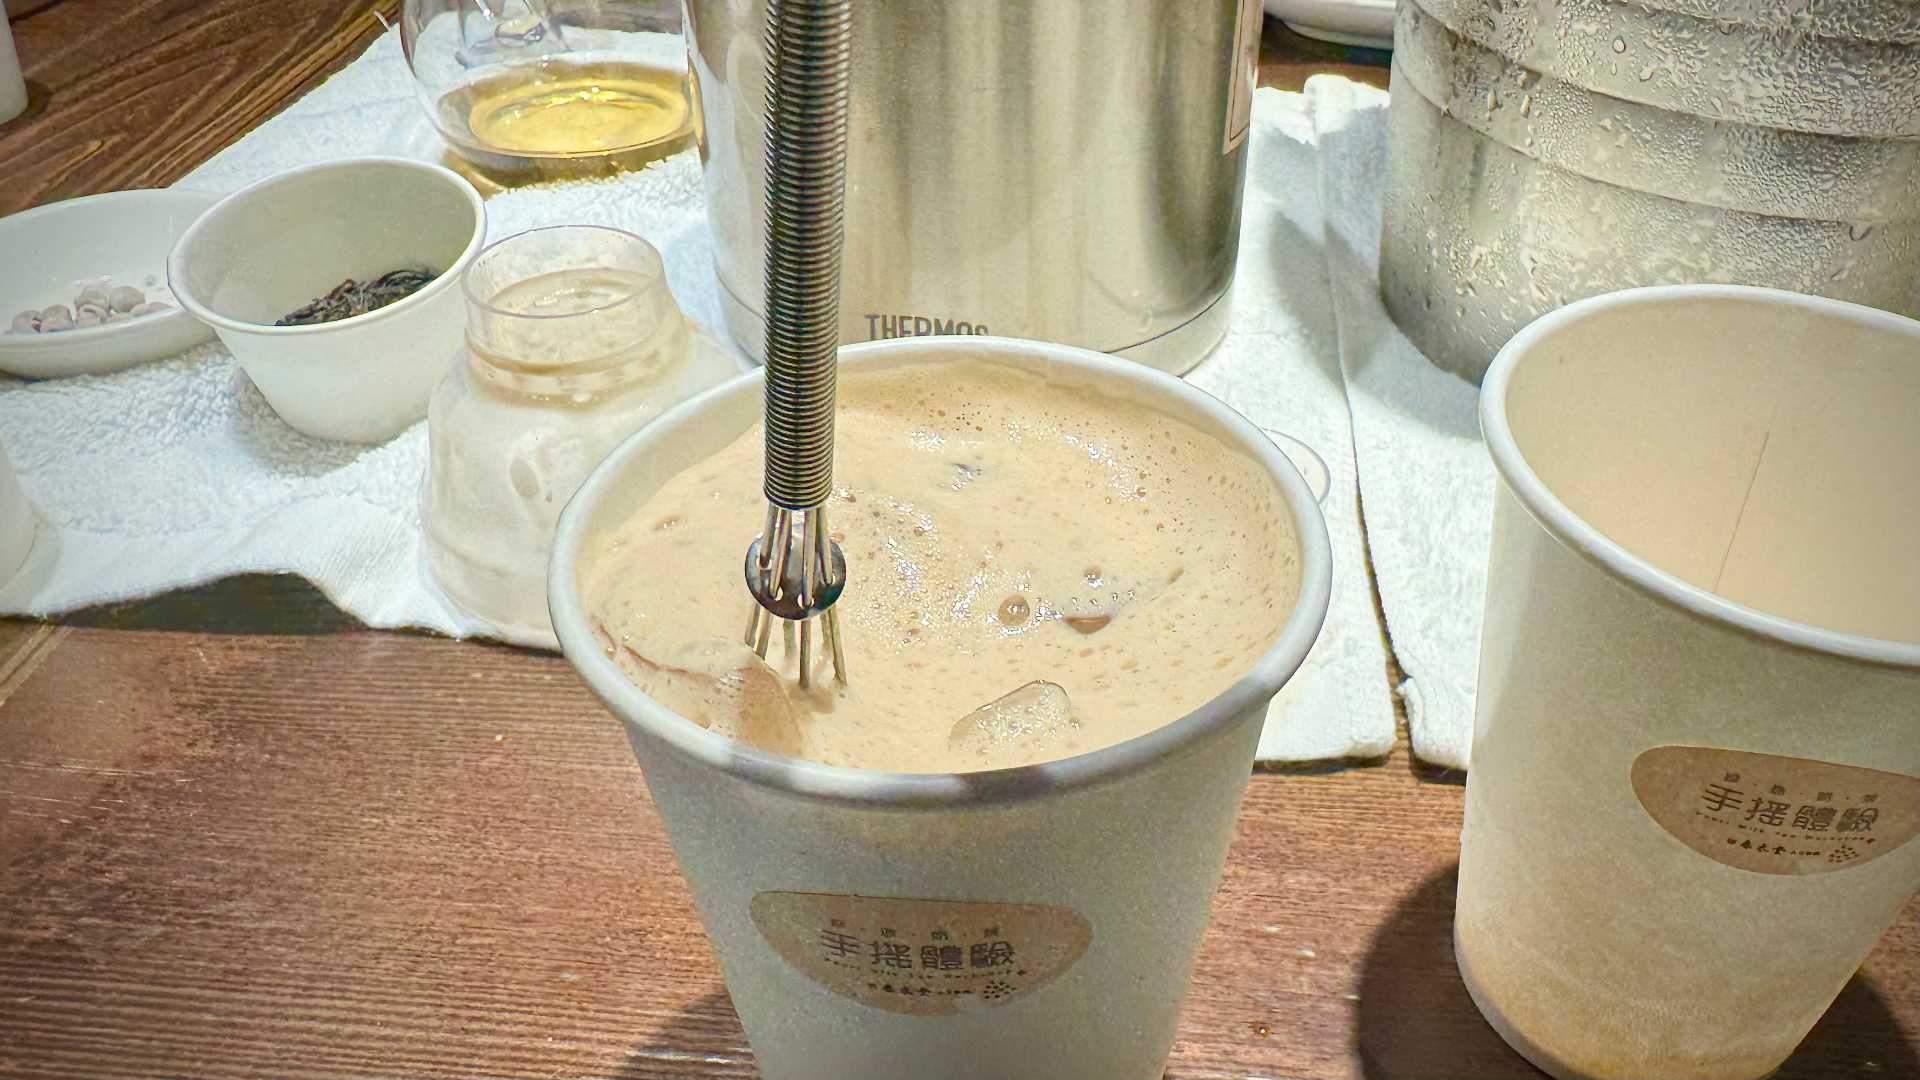 Whisking a cup of iced bubble tea.